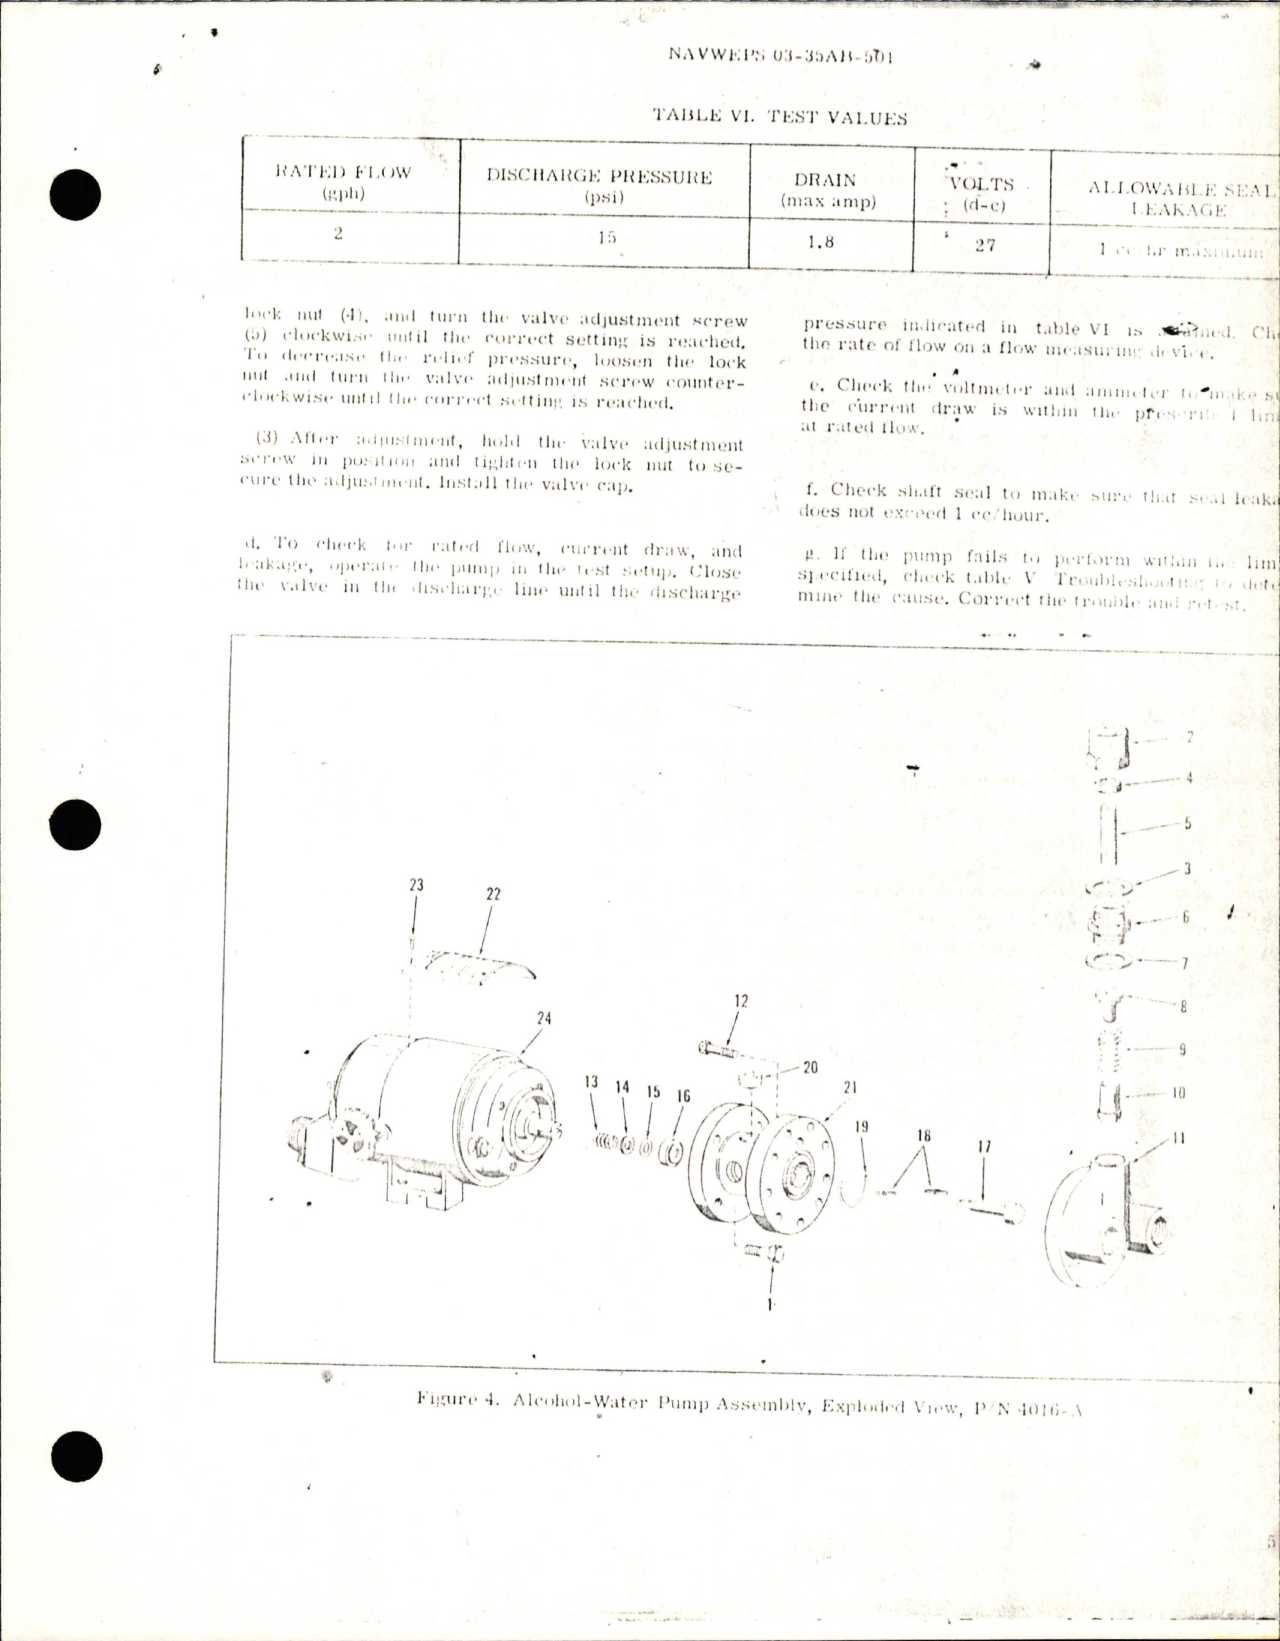 Sample page 5 from AirCorps Library document: Overhaul Instructions with Parts for Alcohol-Water Pump Assembly - Part 4016-A